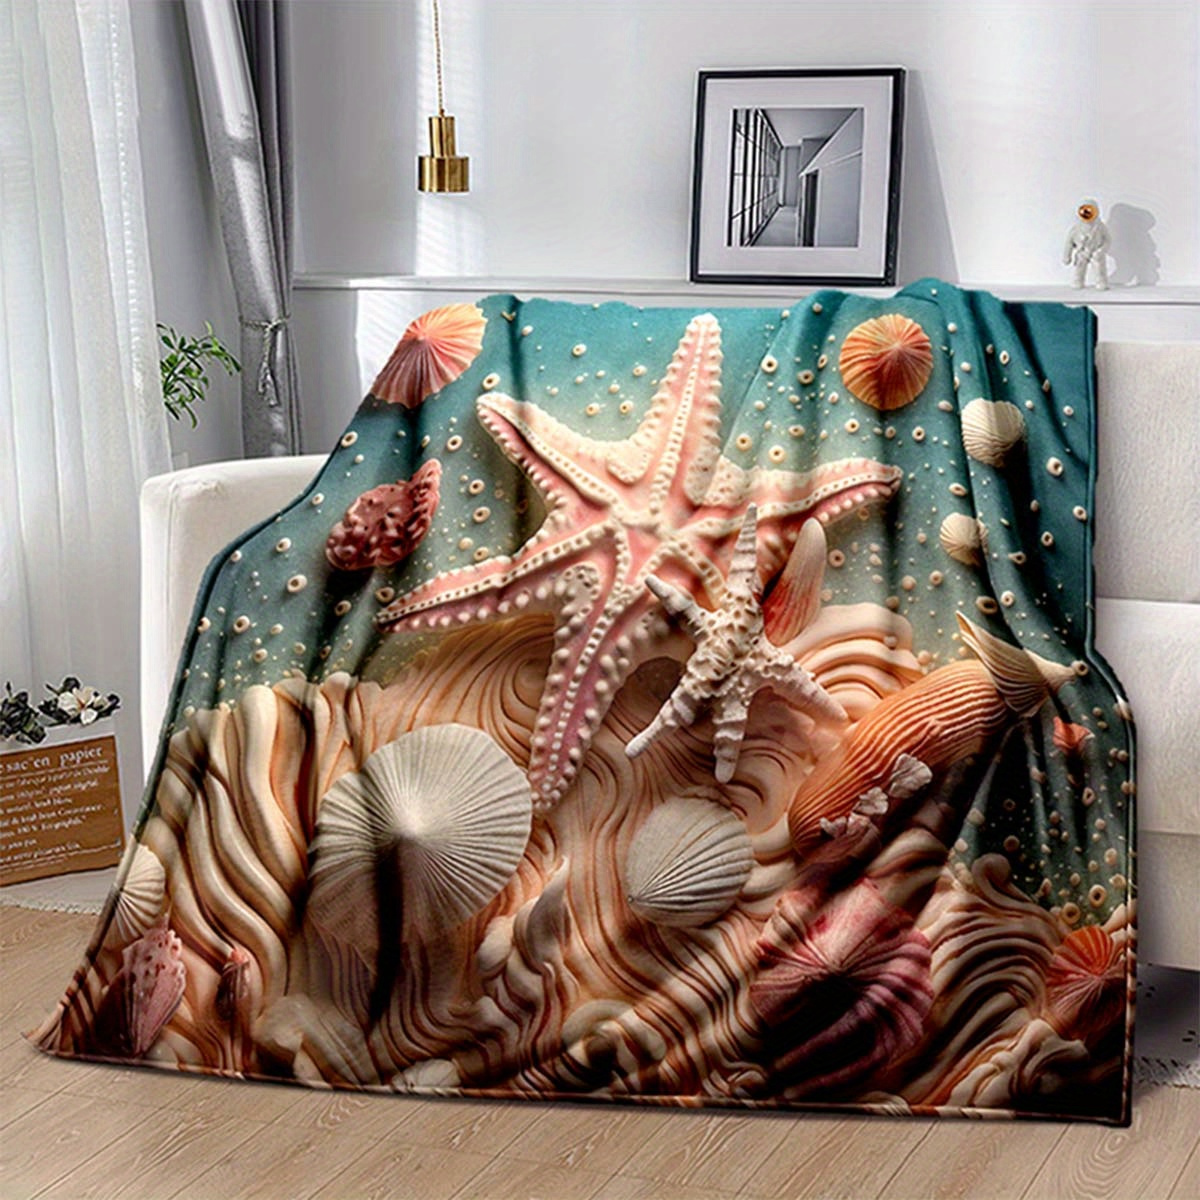 

Starfish And Shells 3d Print Flannel Throw Blanket – Soft Polyester Fiber, 100% Polyester, Large Coverage Area For Bedroom, Living Room, Sofa, Picnic, Napping, Car Seat – Beach Theme Couch Chair Cover